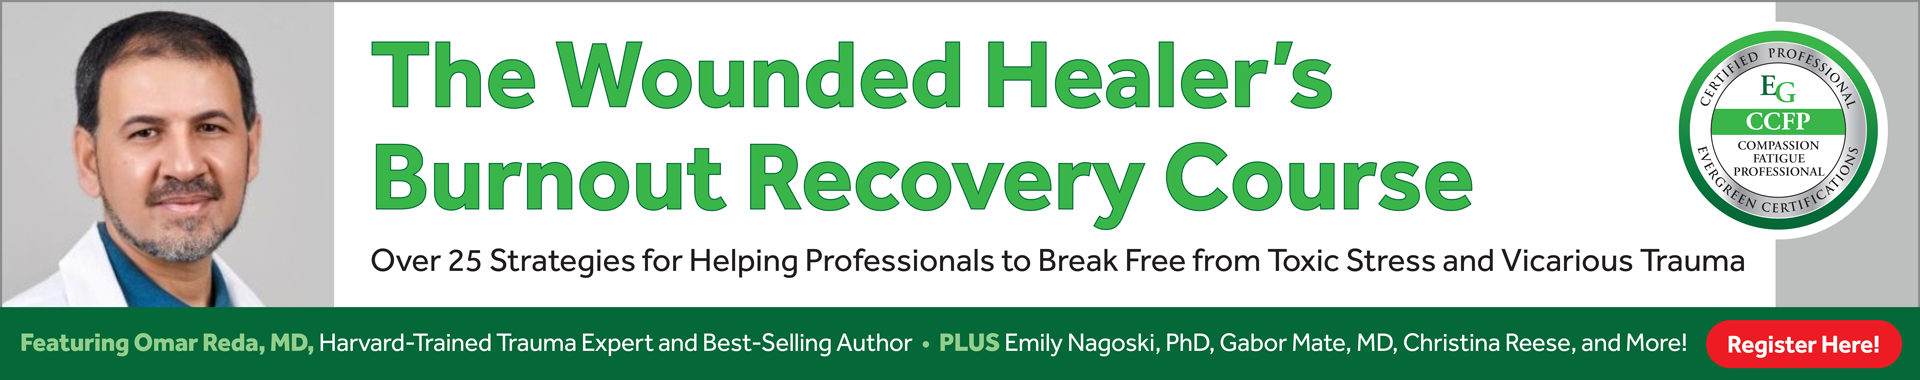 The Wounded Healer's Burn Out Recovery Course: Over 25 Strategies for Helping Professionals to Break Free from Toxic Stress & Vicarious Trauma